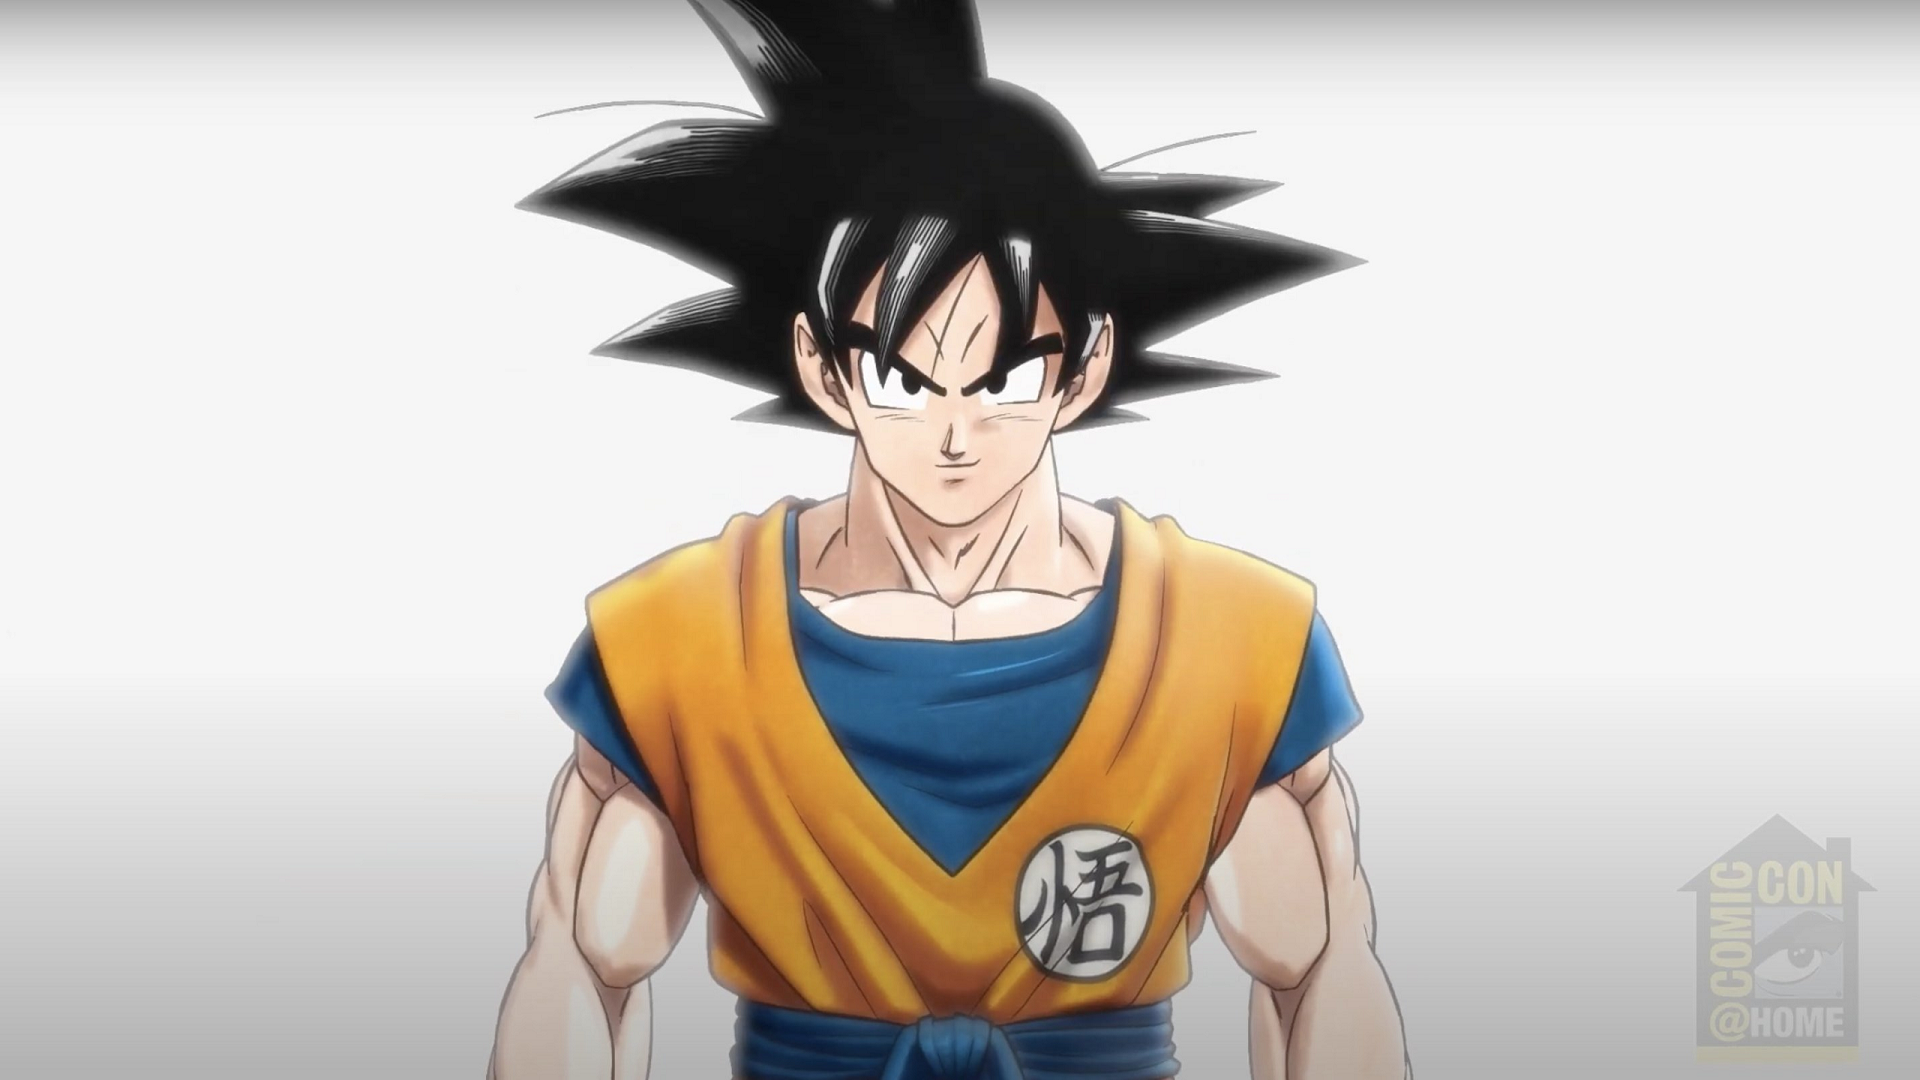 Dragon Ball Super Movie 2022 Announced As Dragon Ball Super: Super Hero, Features New CG Art Style And Original Characters